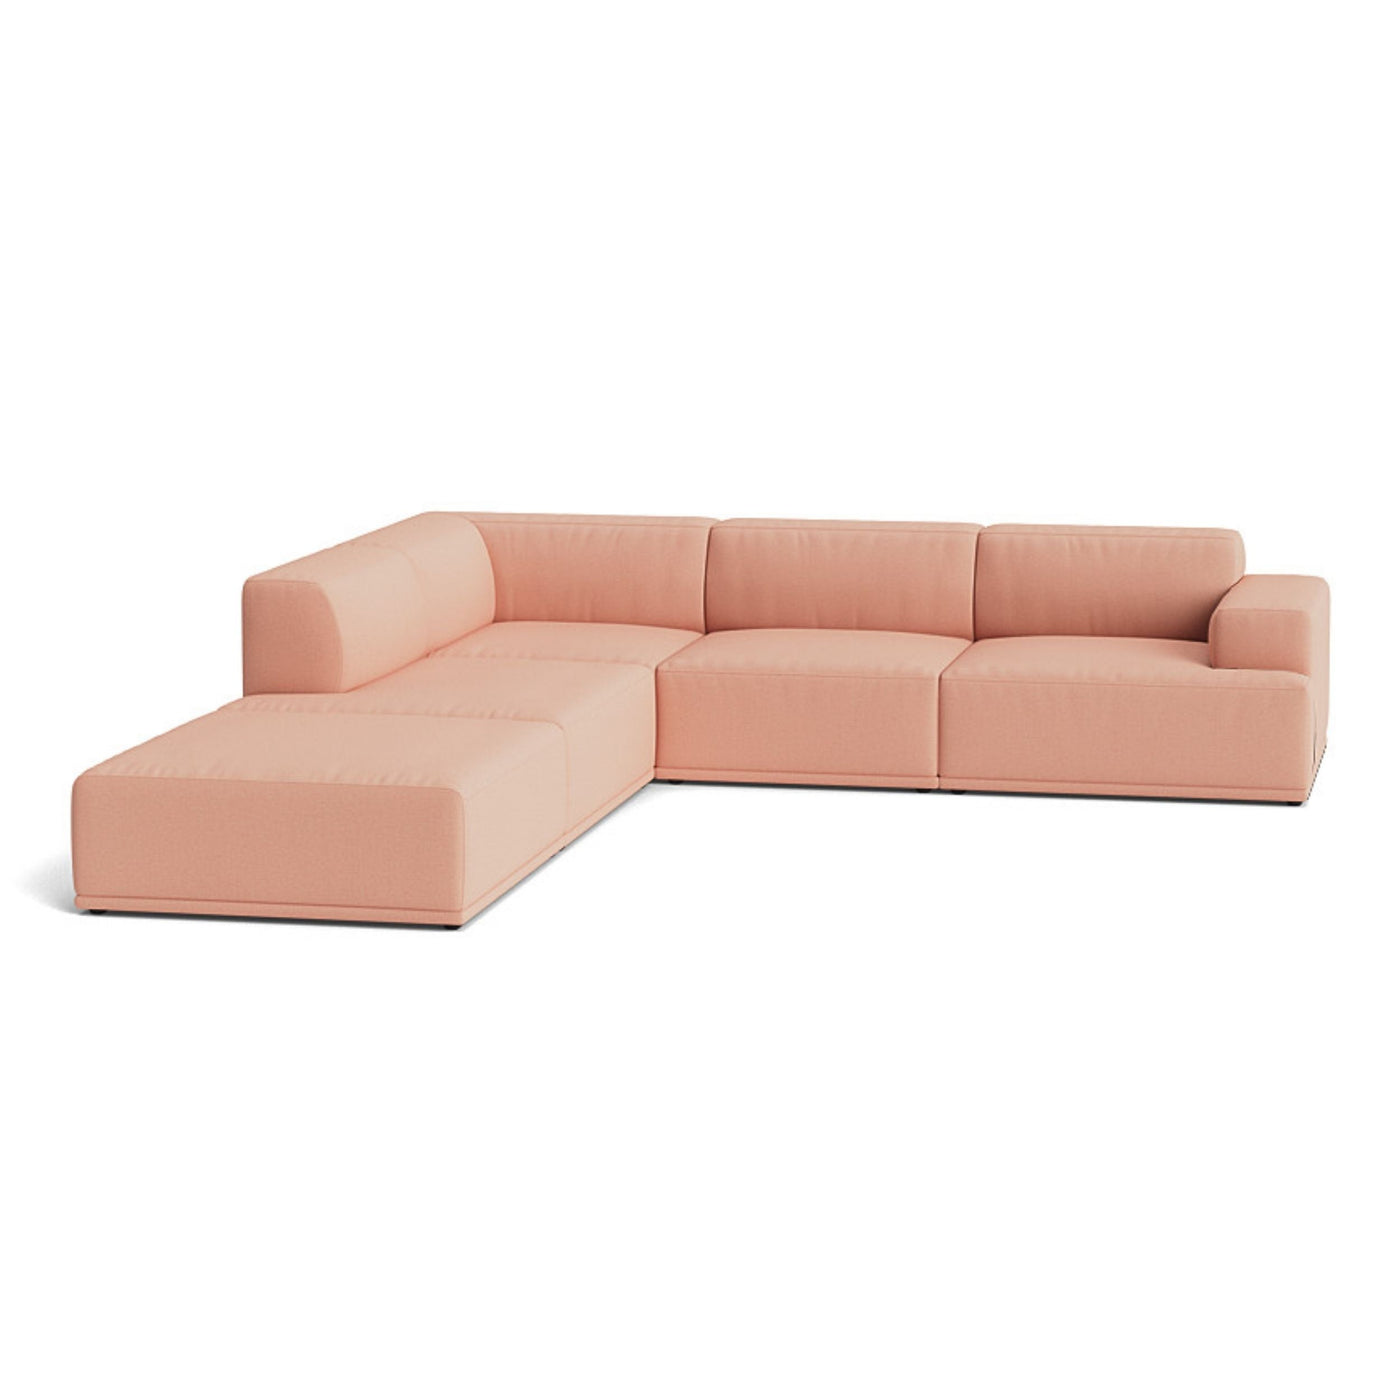 Muuto Connect Soft Modular Corner Sofa, configuration 1. Made-to-order from someday designs. #colour_steelcut-trio-515